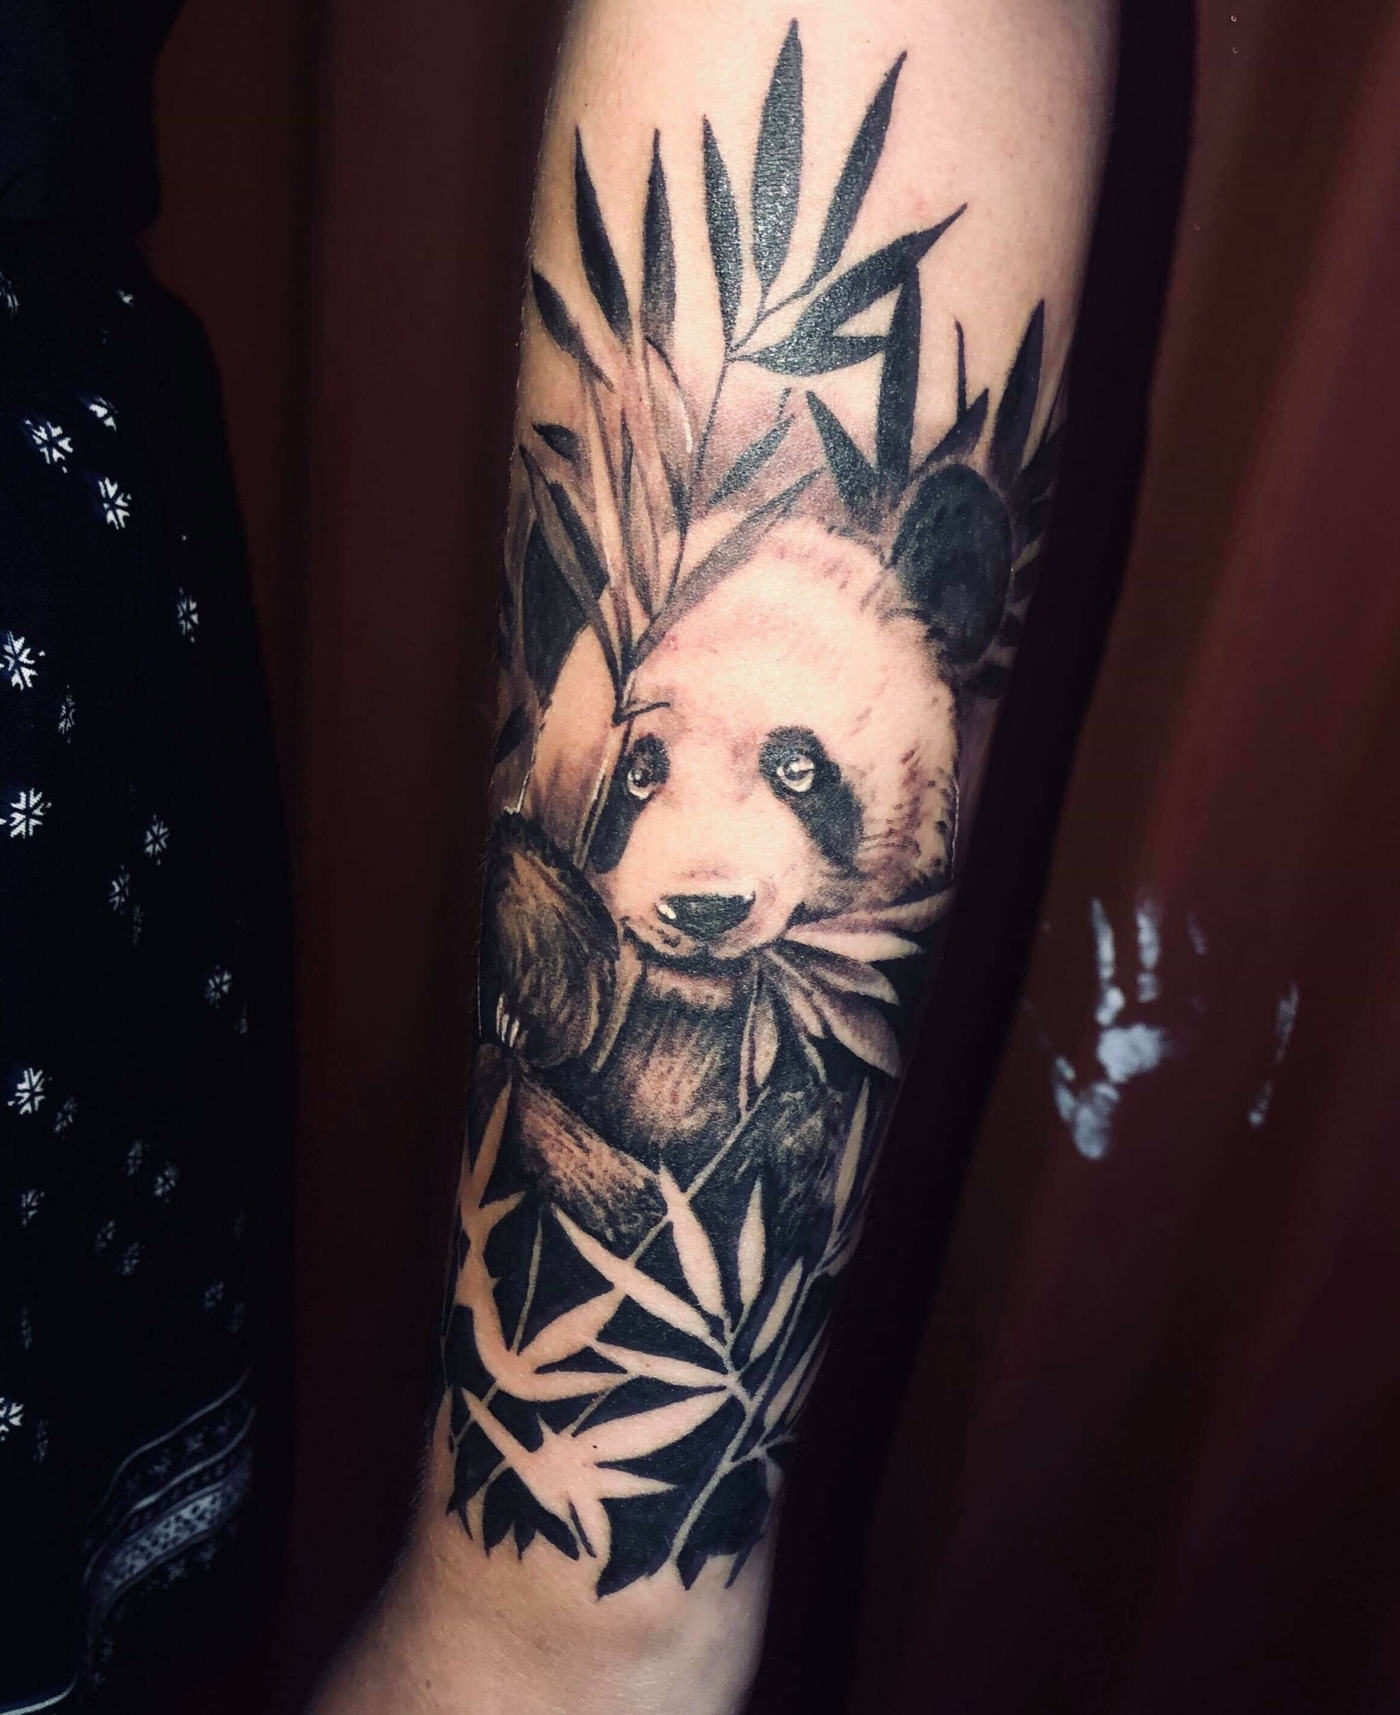 Higher Panda Tattoo And Rotate Pandabar As A Motif Was The Tier Symbolized Design Idea Decor Object Your Daily Dose Of Best Home Decorating Ideas Interior Design Inspiration